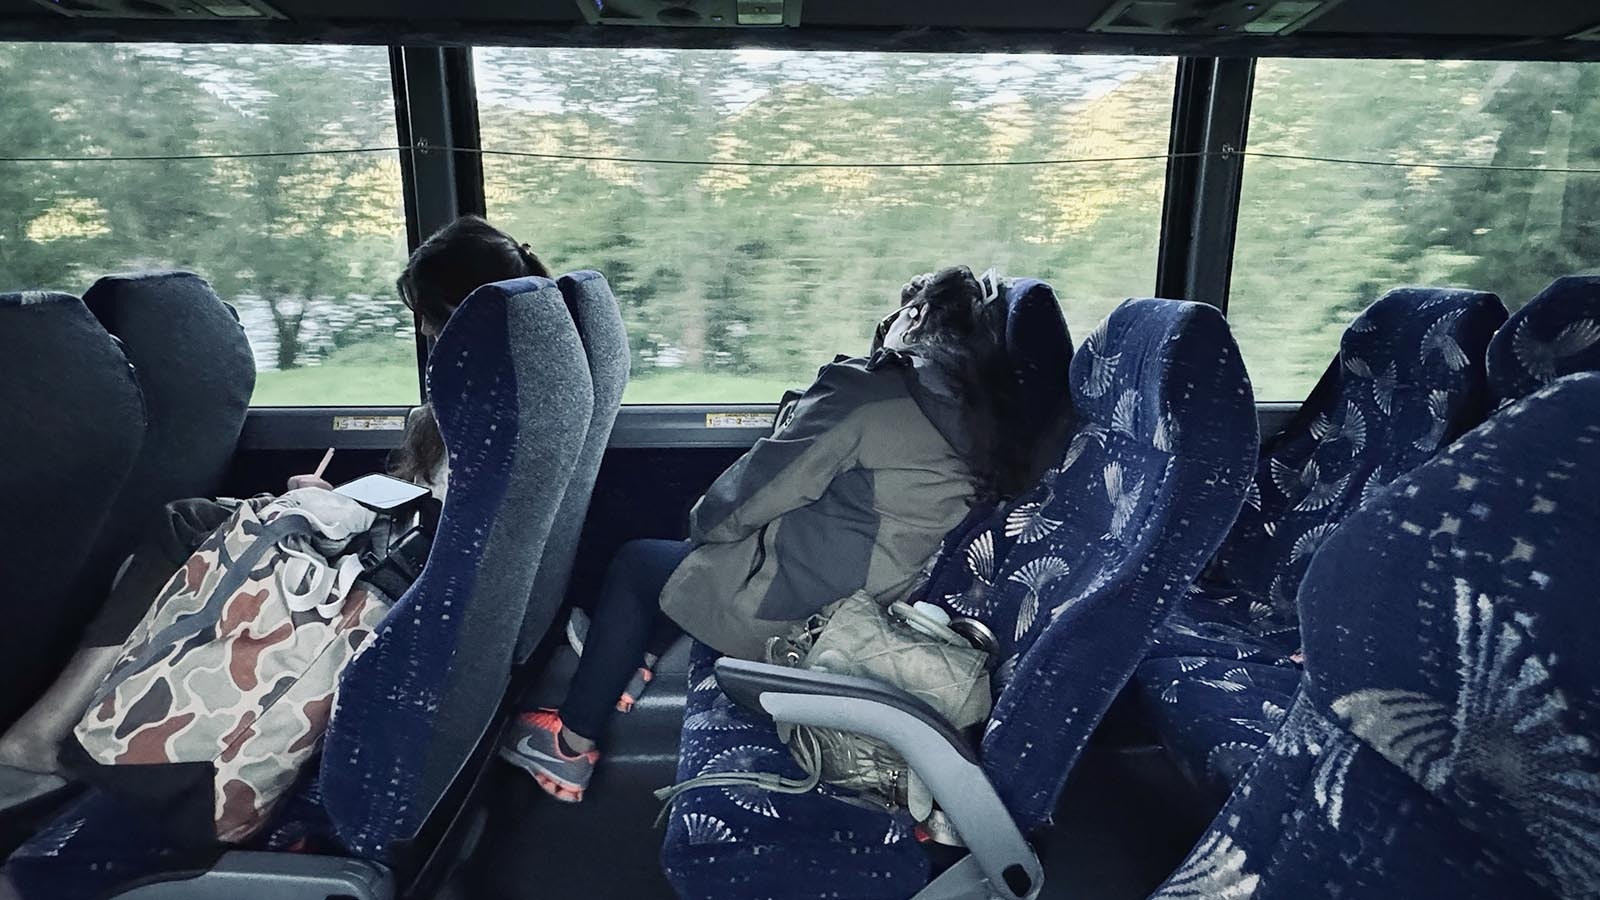 The handful of passengers on the Start bus that traveled nearly 100-miles from Driggs, Idaho, to their jobs in Jackson, Wyoming, napped on Thursday after rushing to make the 5:50 a.m. departure.